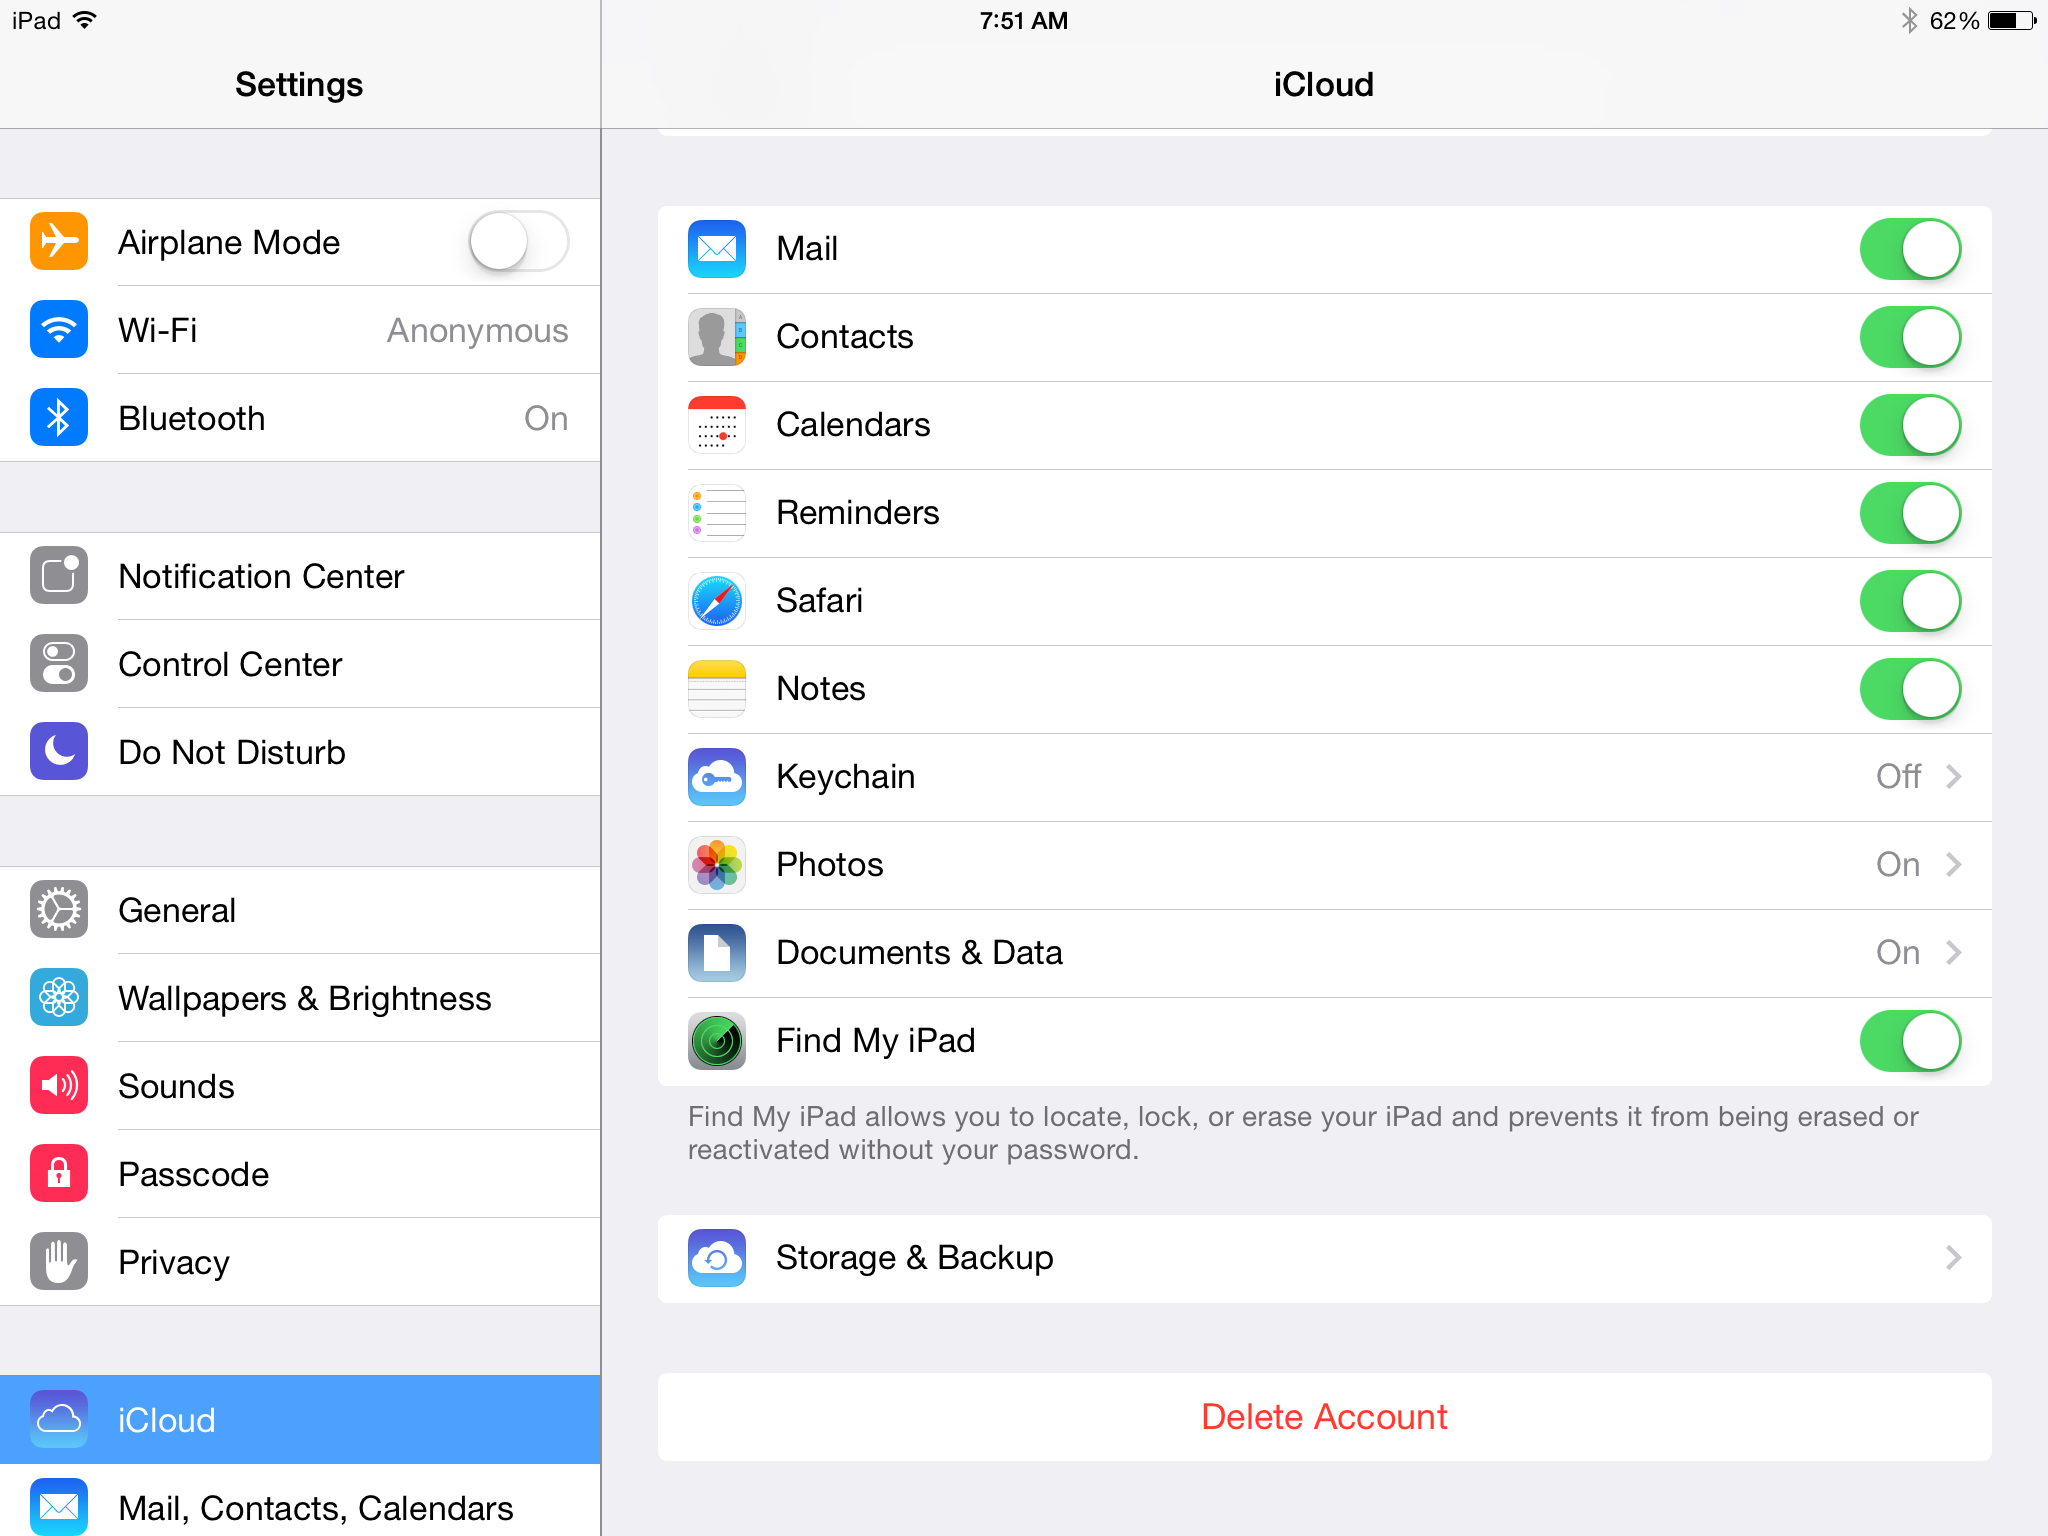 the best way to use email and contacts for business on your iphone and mac